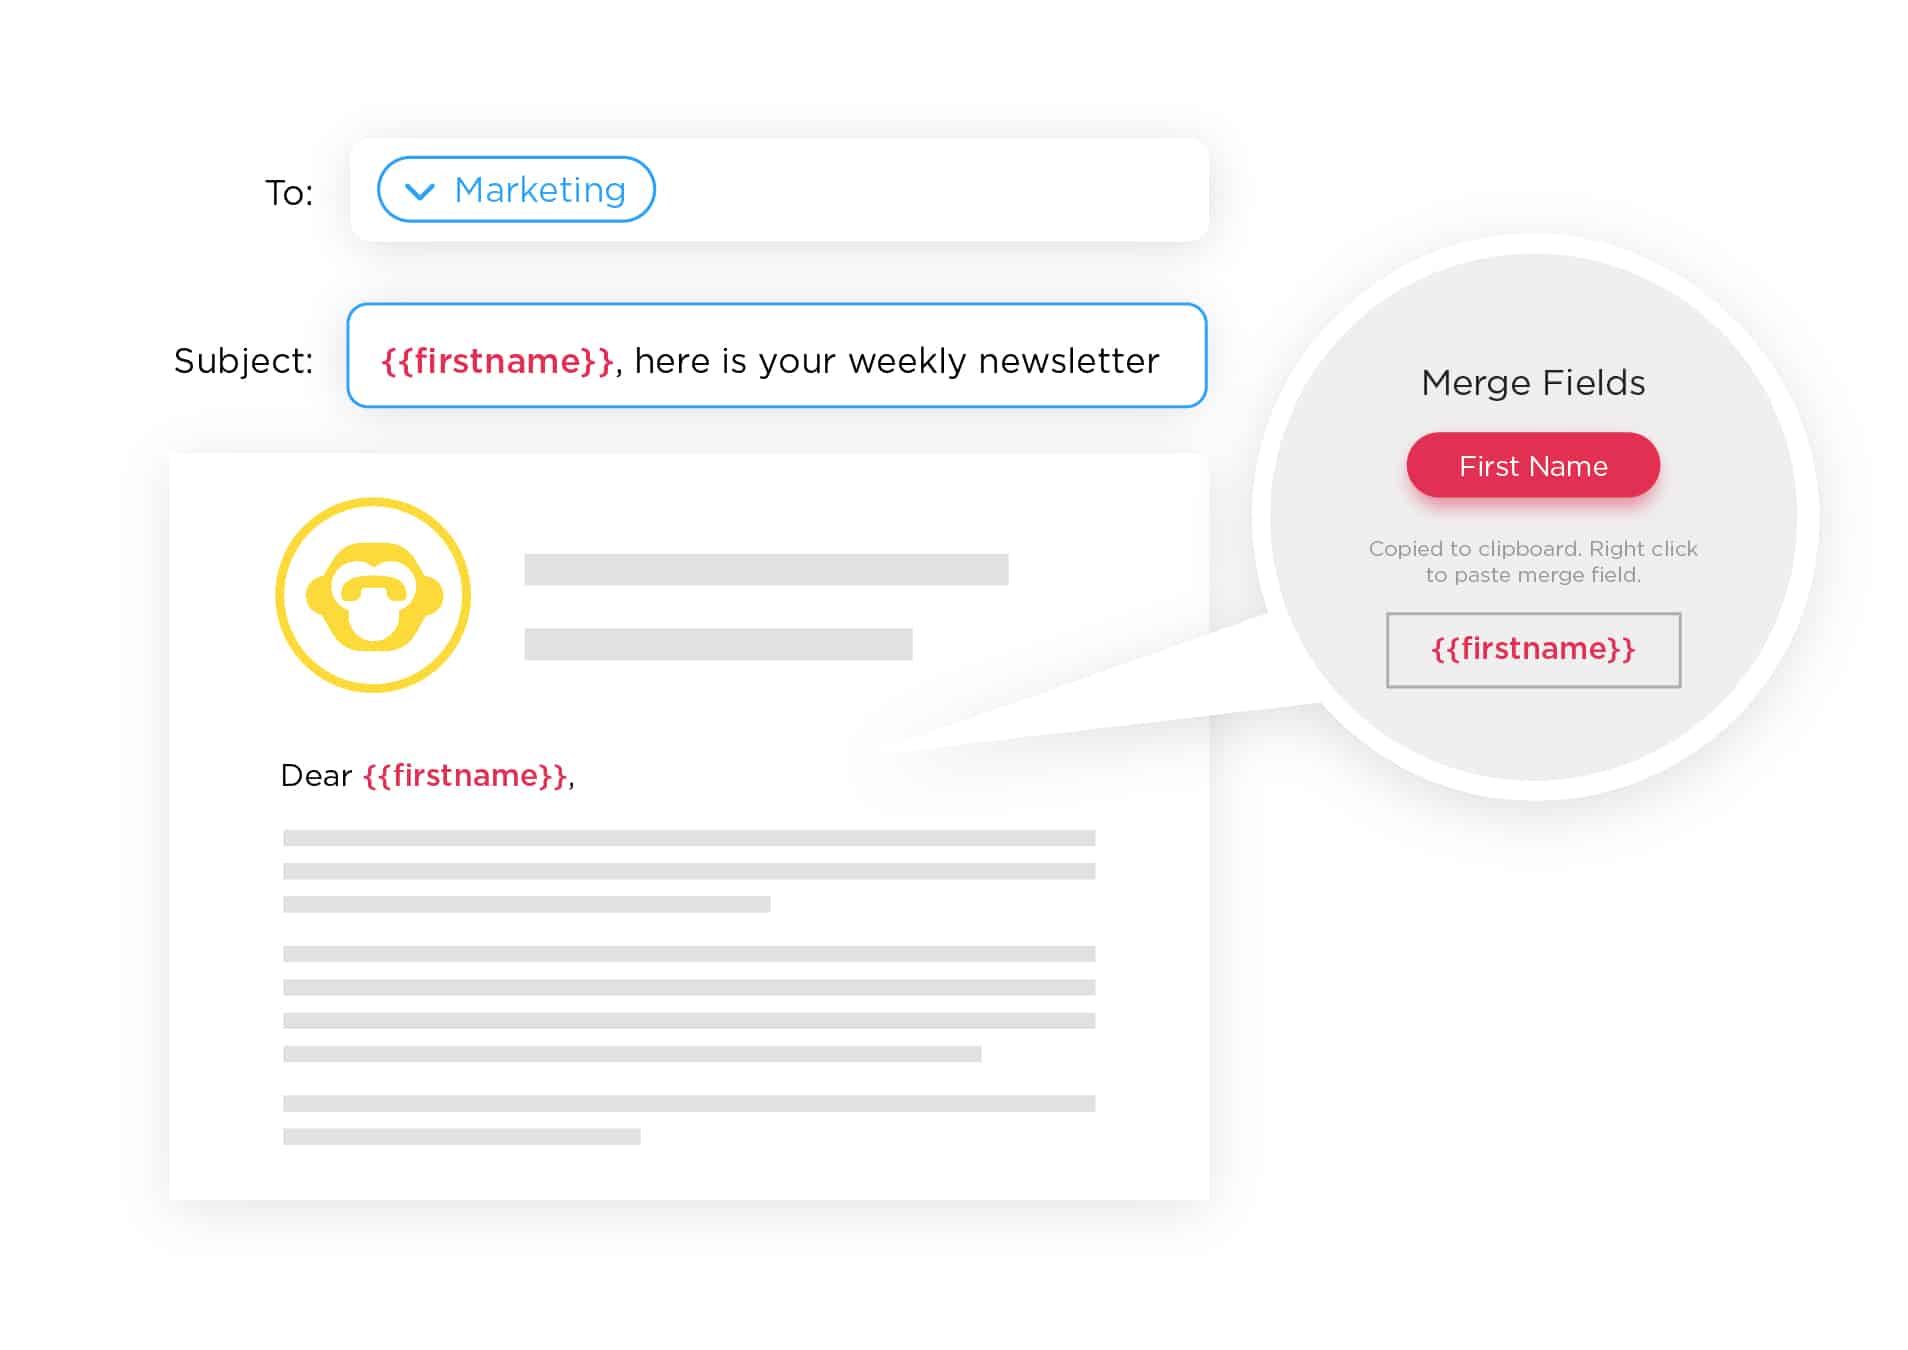 Image of merge tags added to an email using ContactMonkey's email template builder.